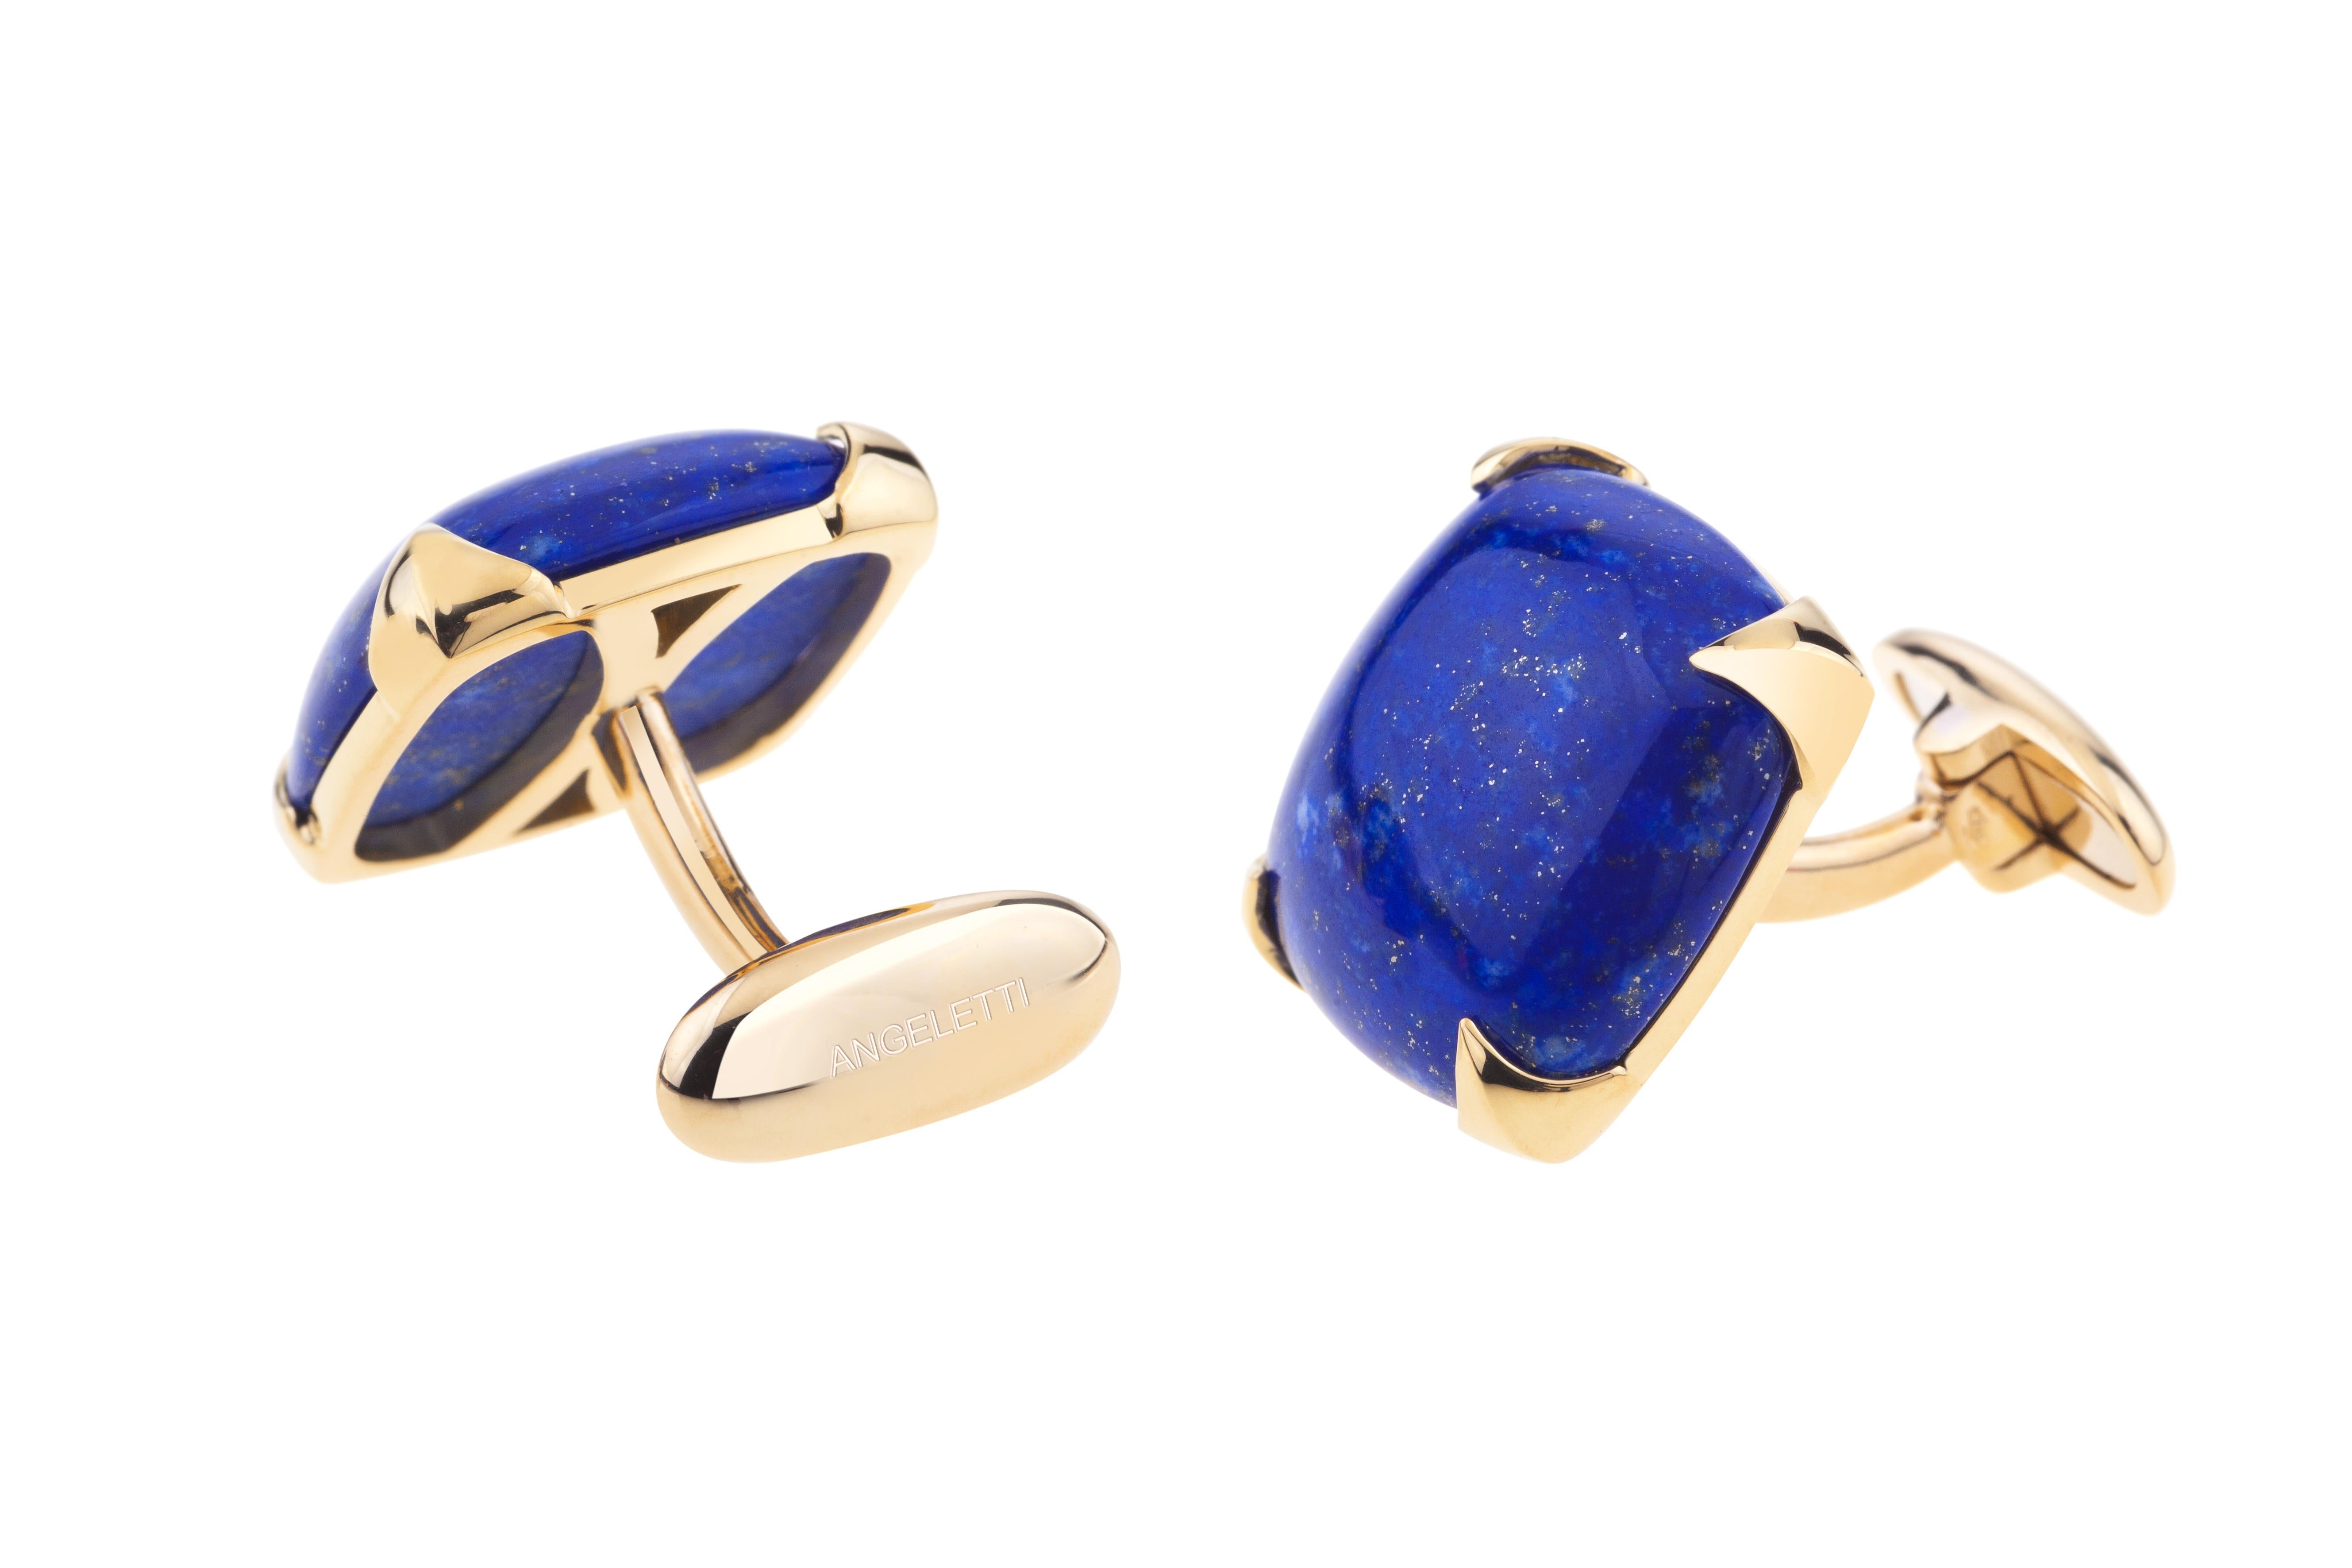 Cufflinks For Men Yellow Gold with Squared Lapislazzuli Cushion Cab.
Everyday Cufflinks for every Business or Leisure Time to be worn on white, light blue or stripe Cuff Shirts.
The stone is particularly attractive for its A Quality, size mm. 18x18